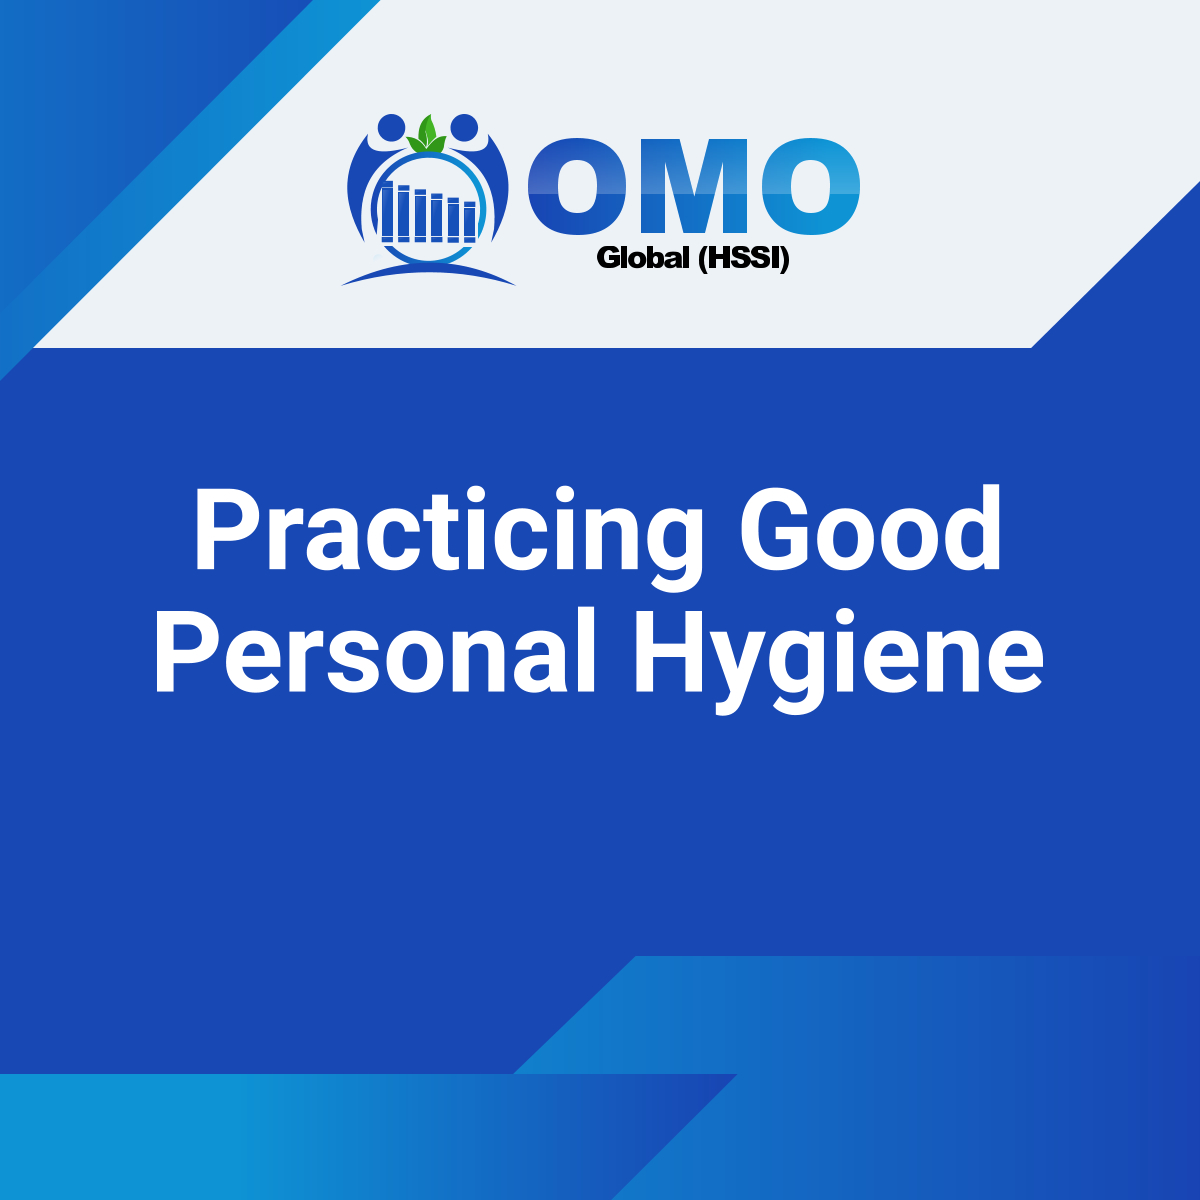 Good hygiene practices are key for maintaining health, preventing the spread of diseases, and promoting a clean and healthy environment for everyone. Start practicing today!

#DrexelHillPA #NonProfitOrganization #GoodPersonalHygiene